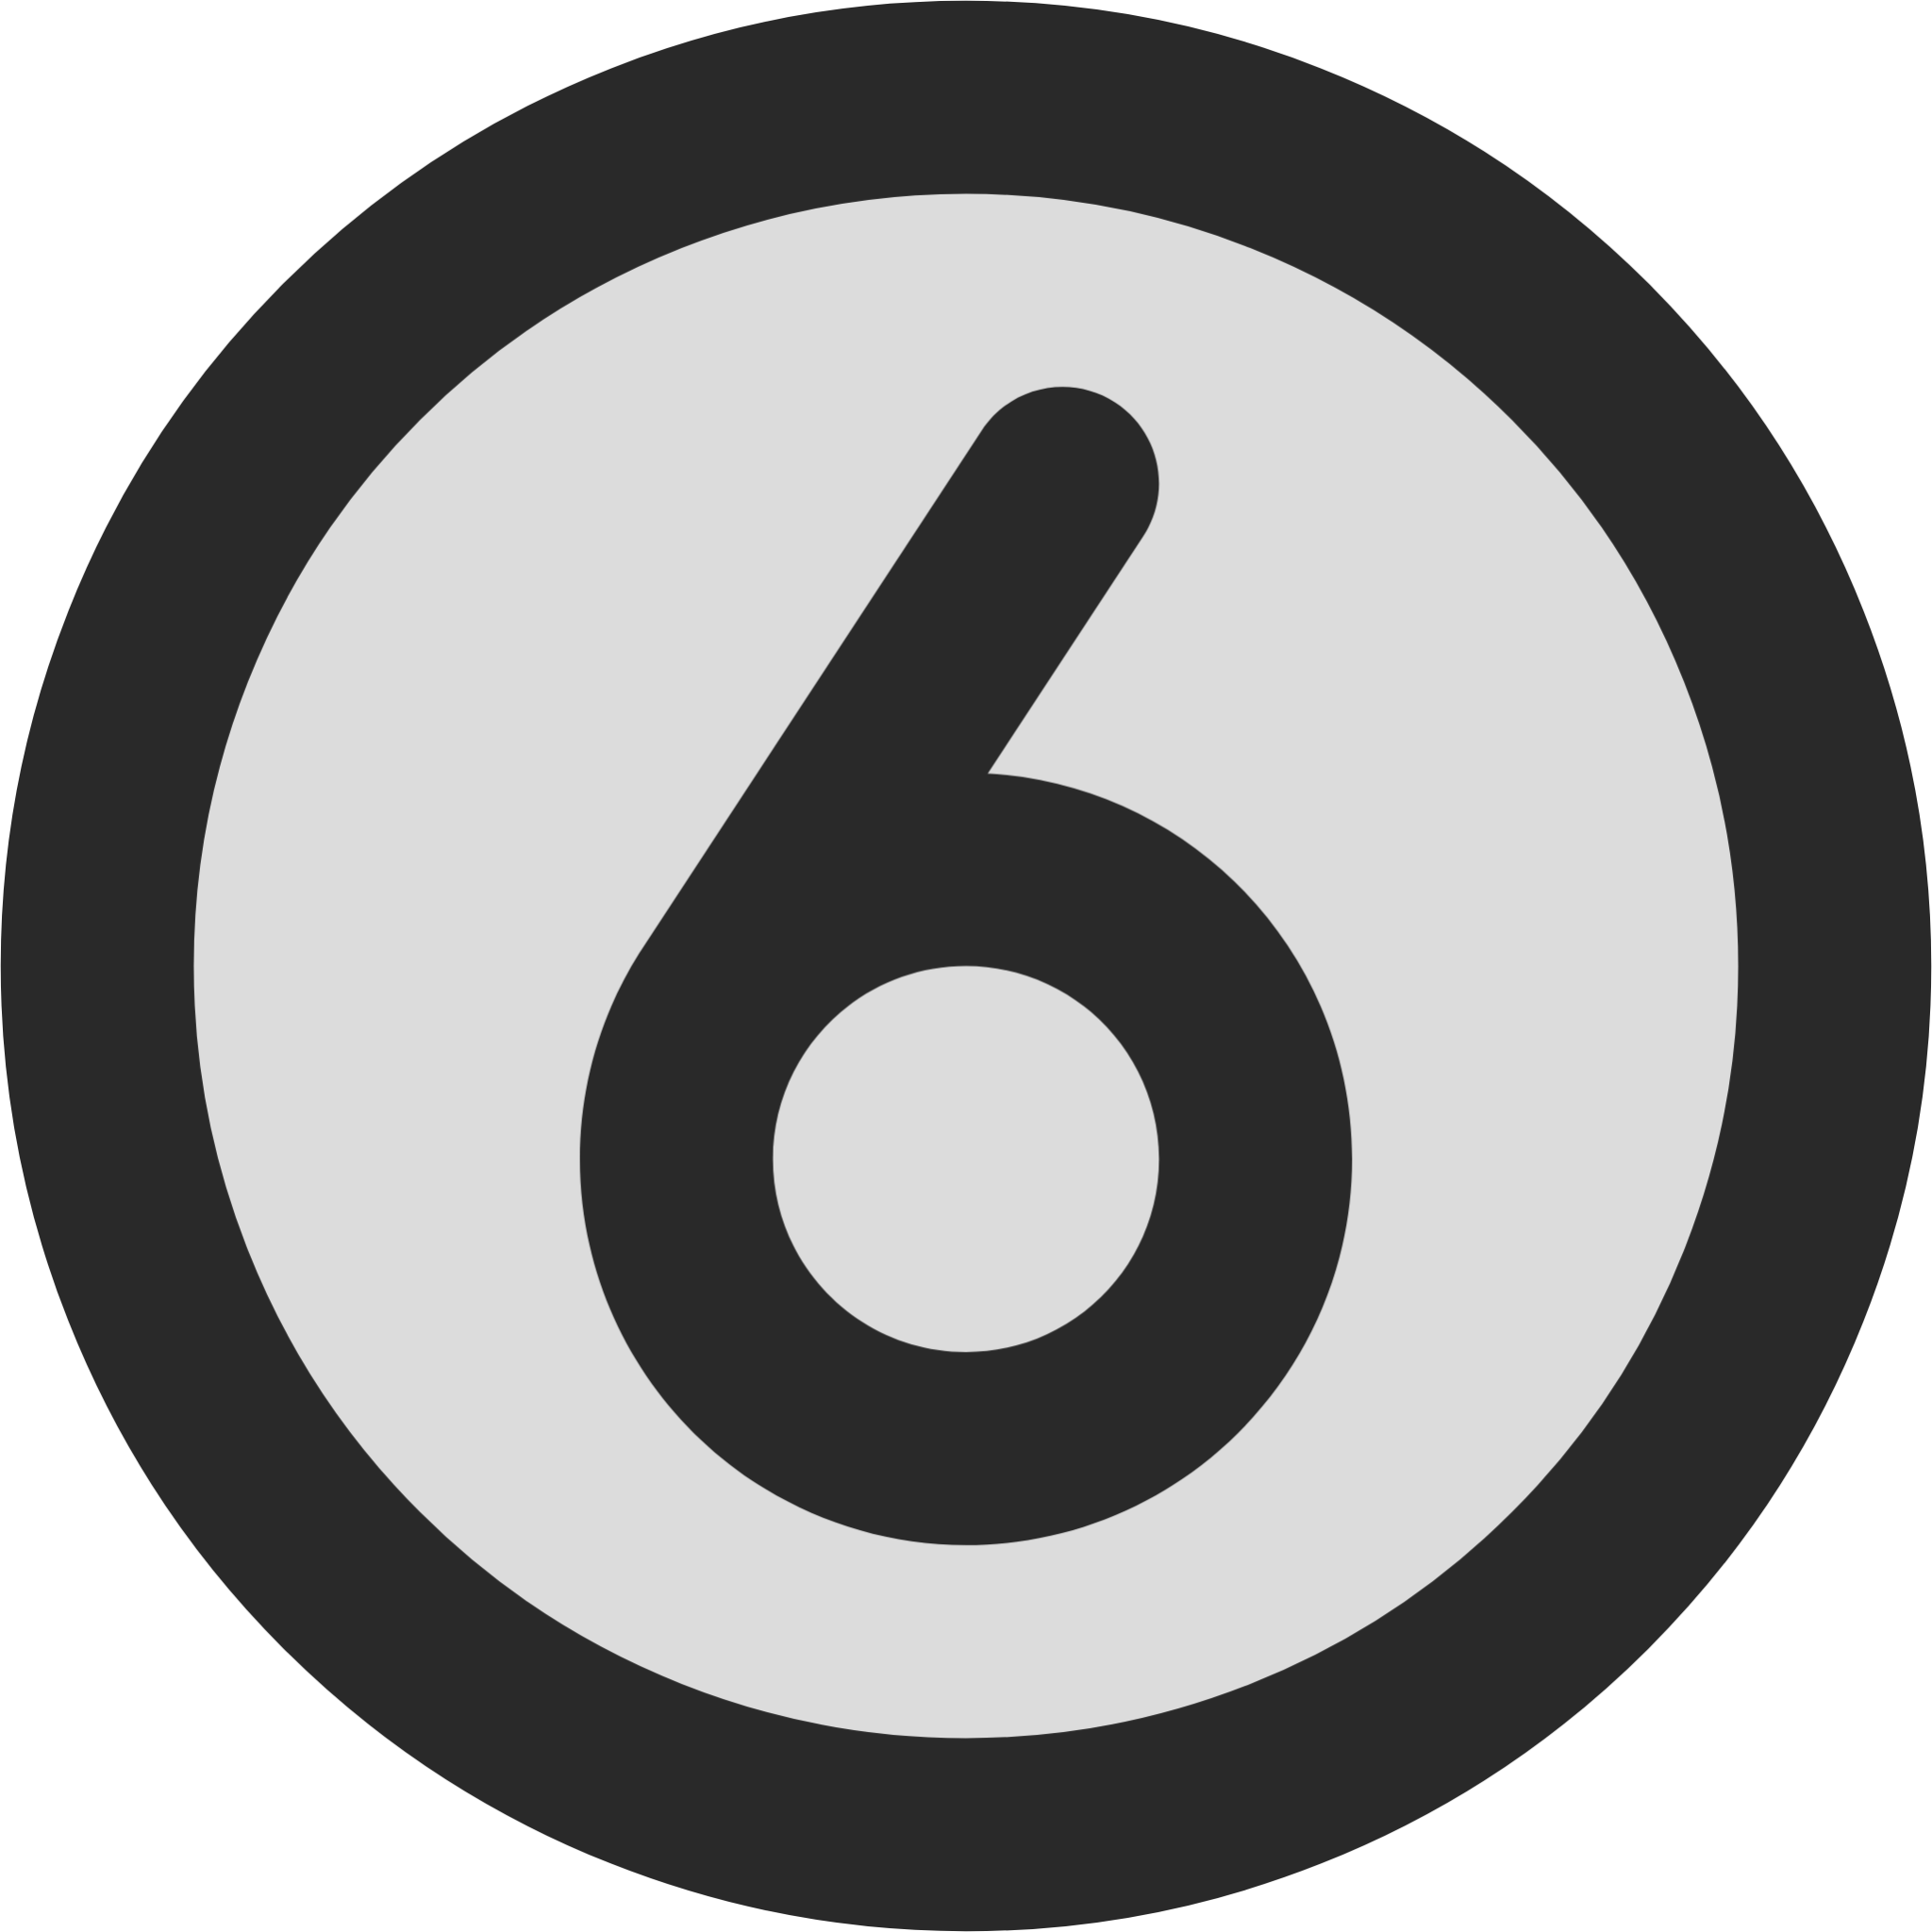 number 6 circle icon